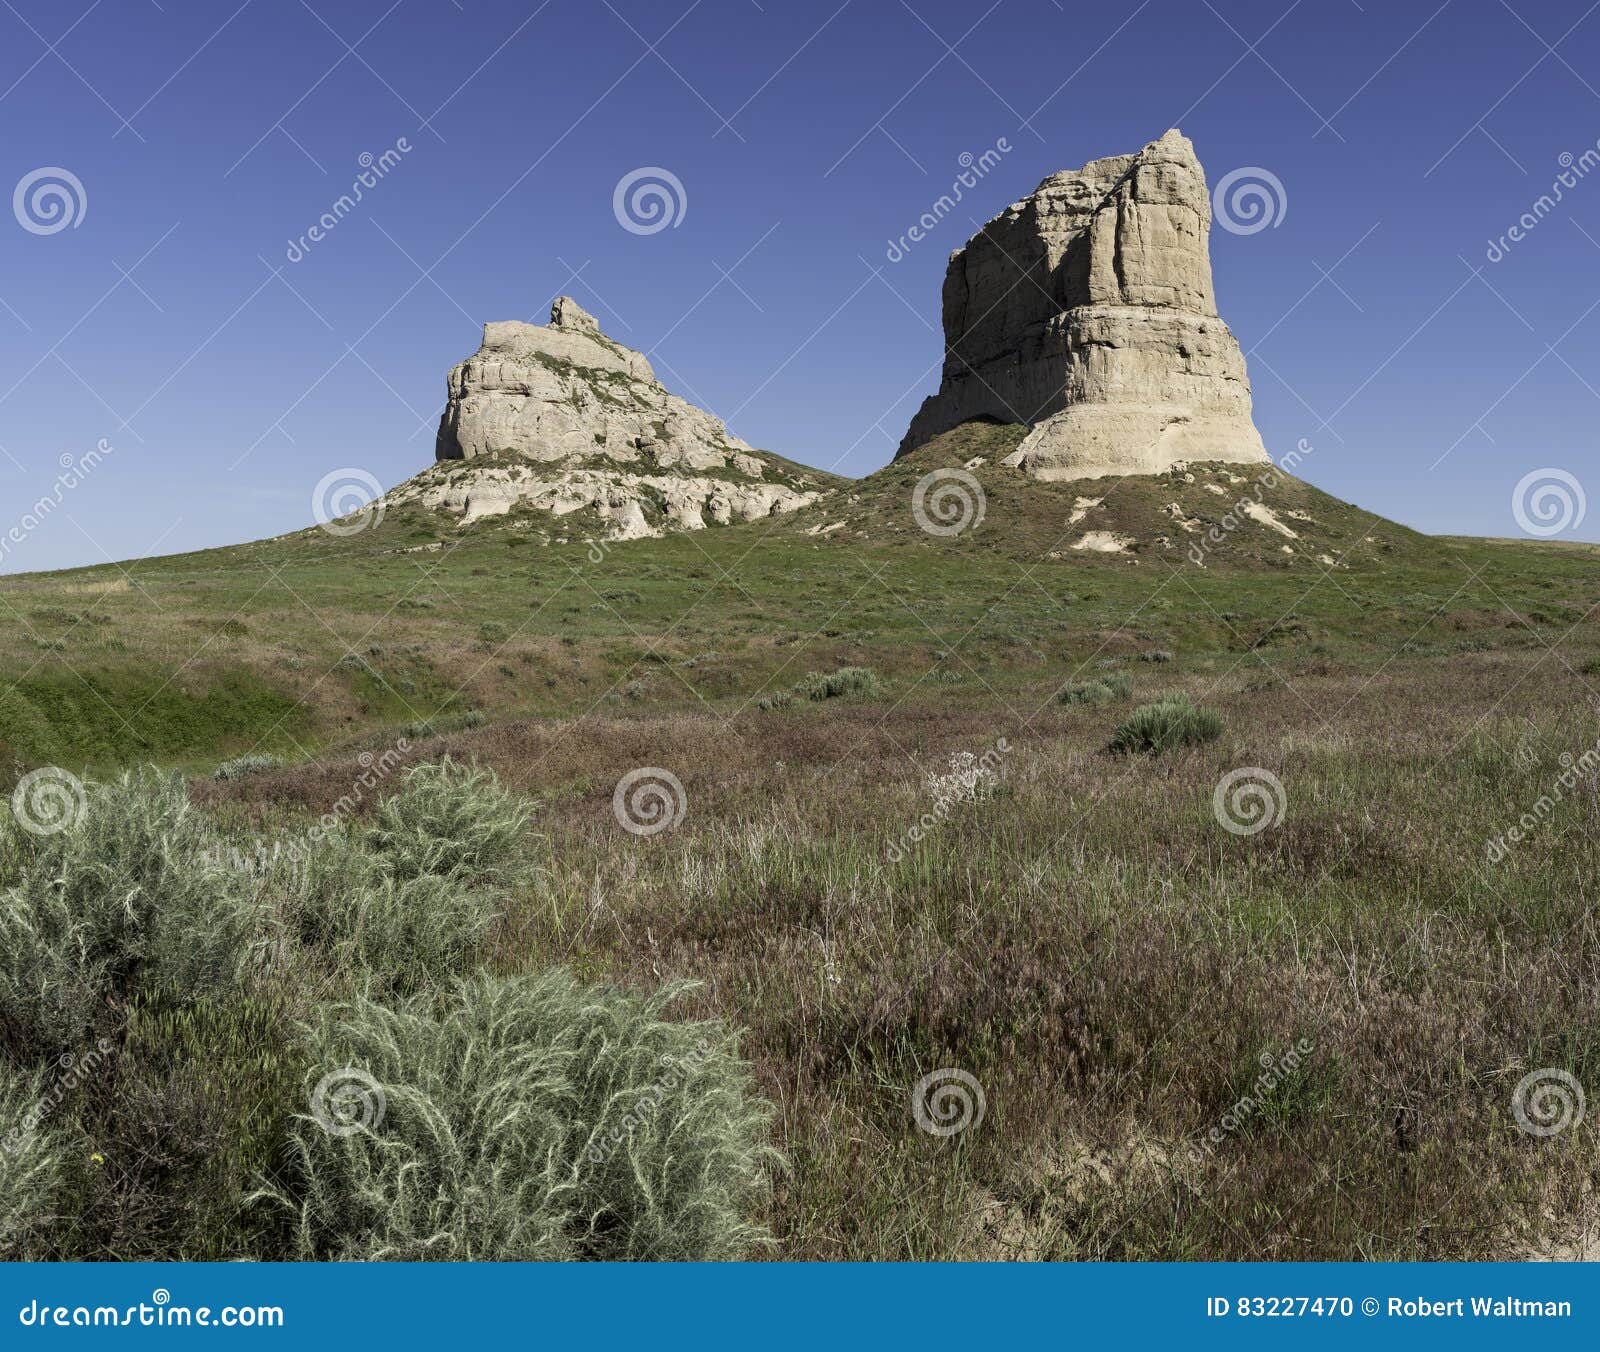 List 101+ Images courthouse and jail rocks photos Superb